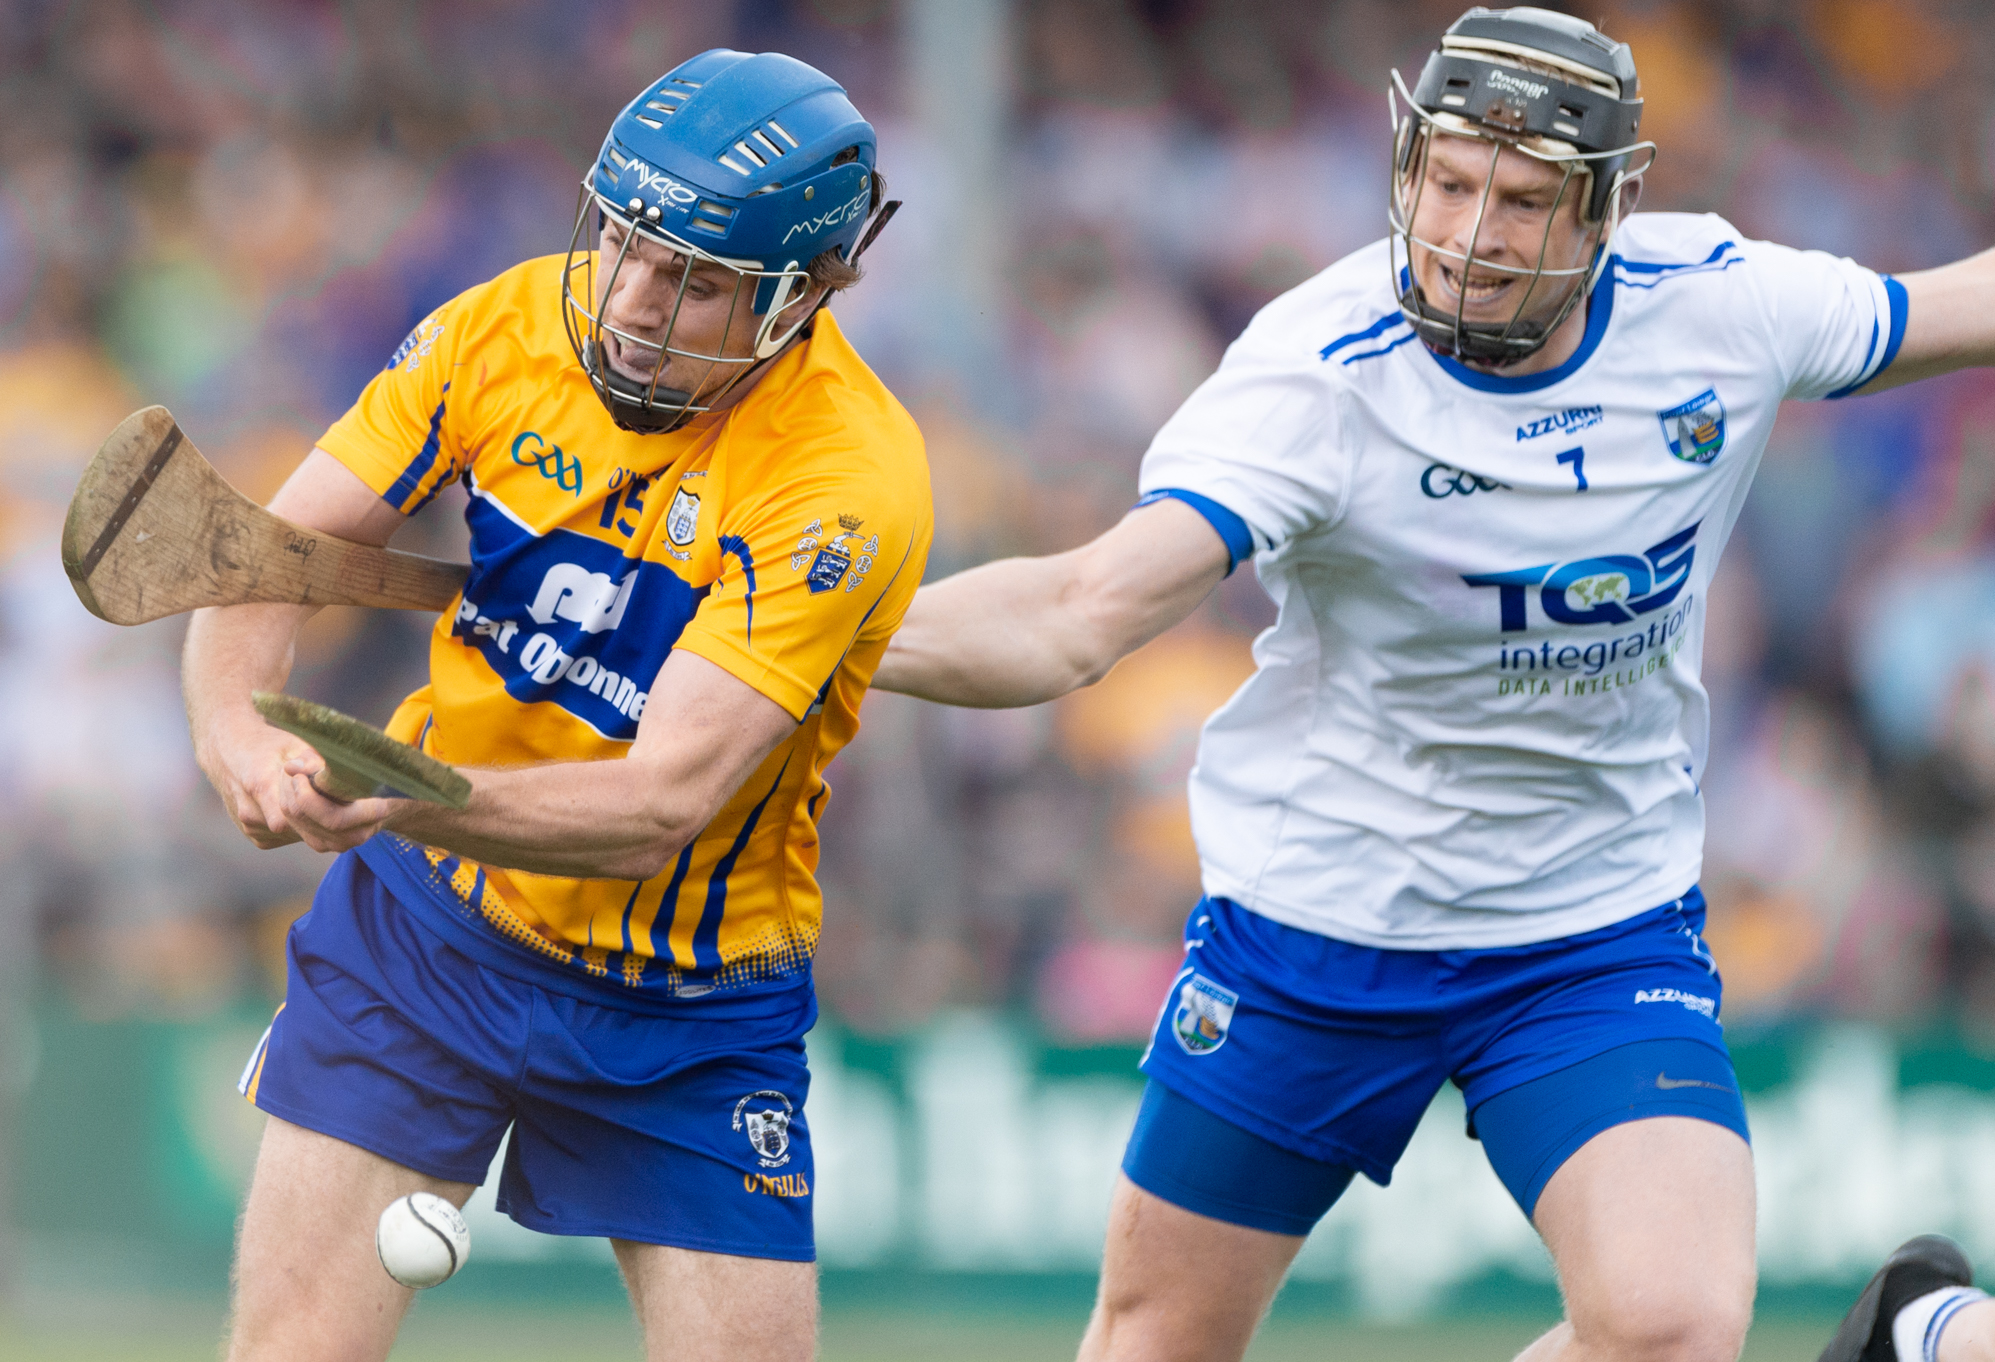 Clare v Waterford MSHC 27-05-18 2 shane o'donnell phillip mahony